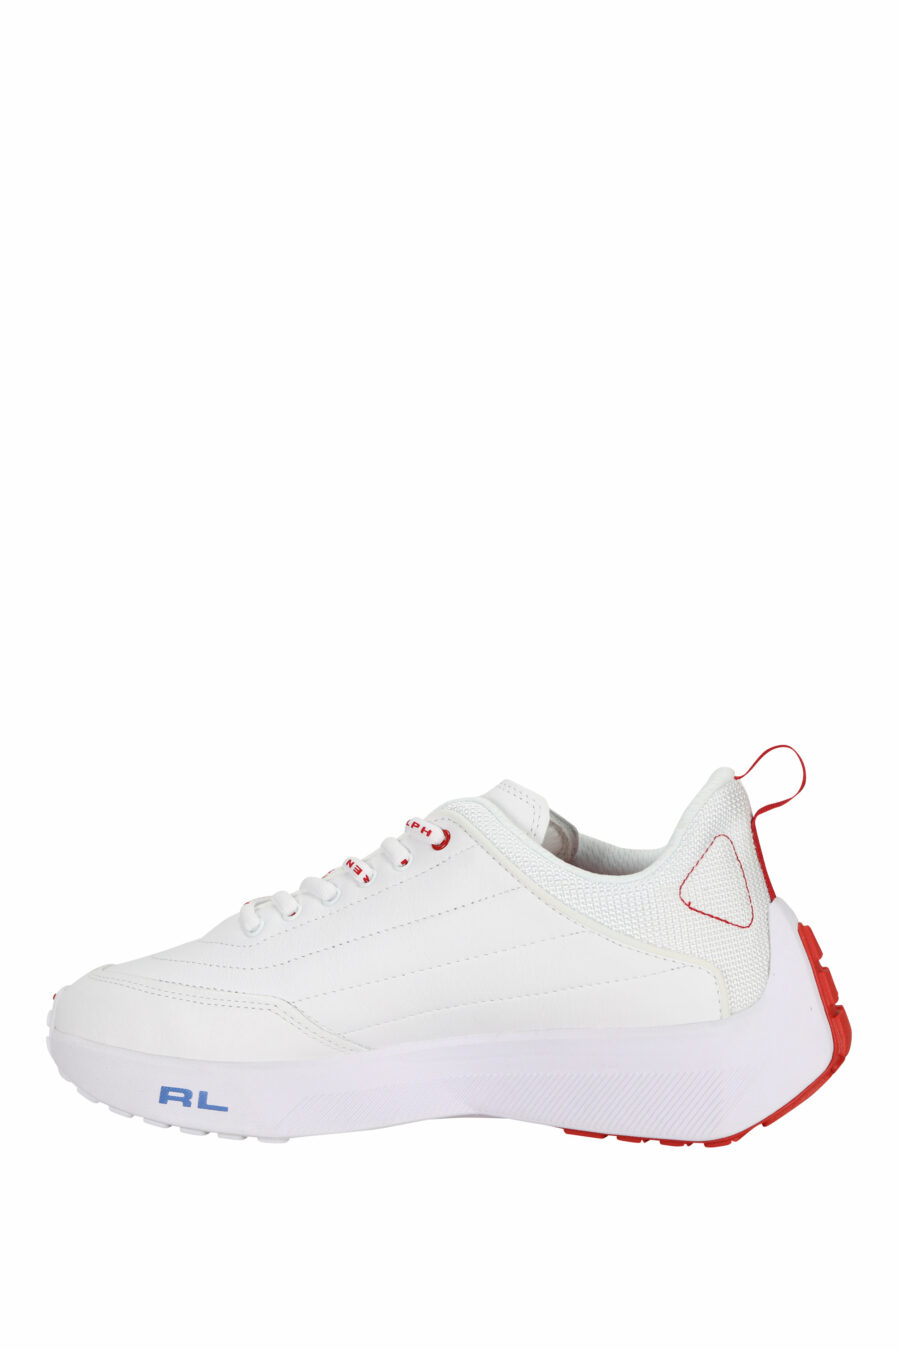 White trainers with mini-logo and red details - 3616535649279 2